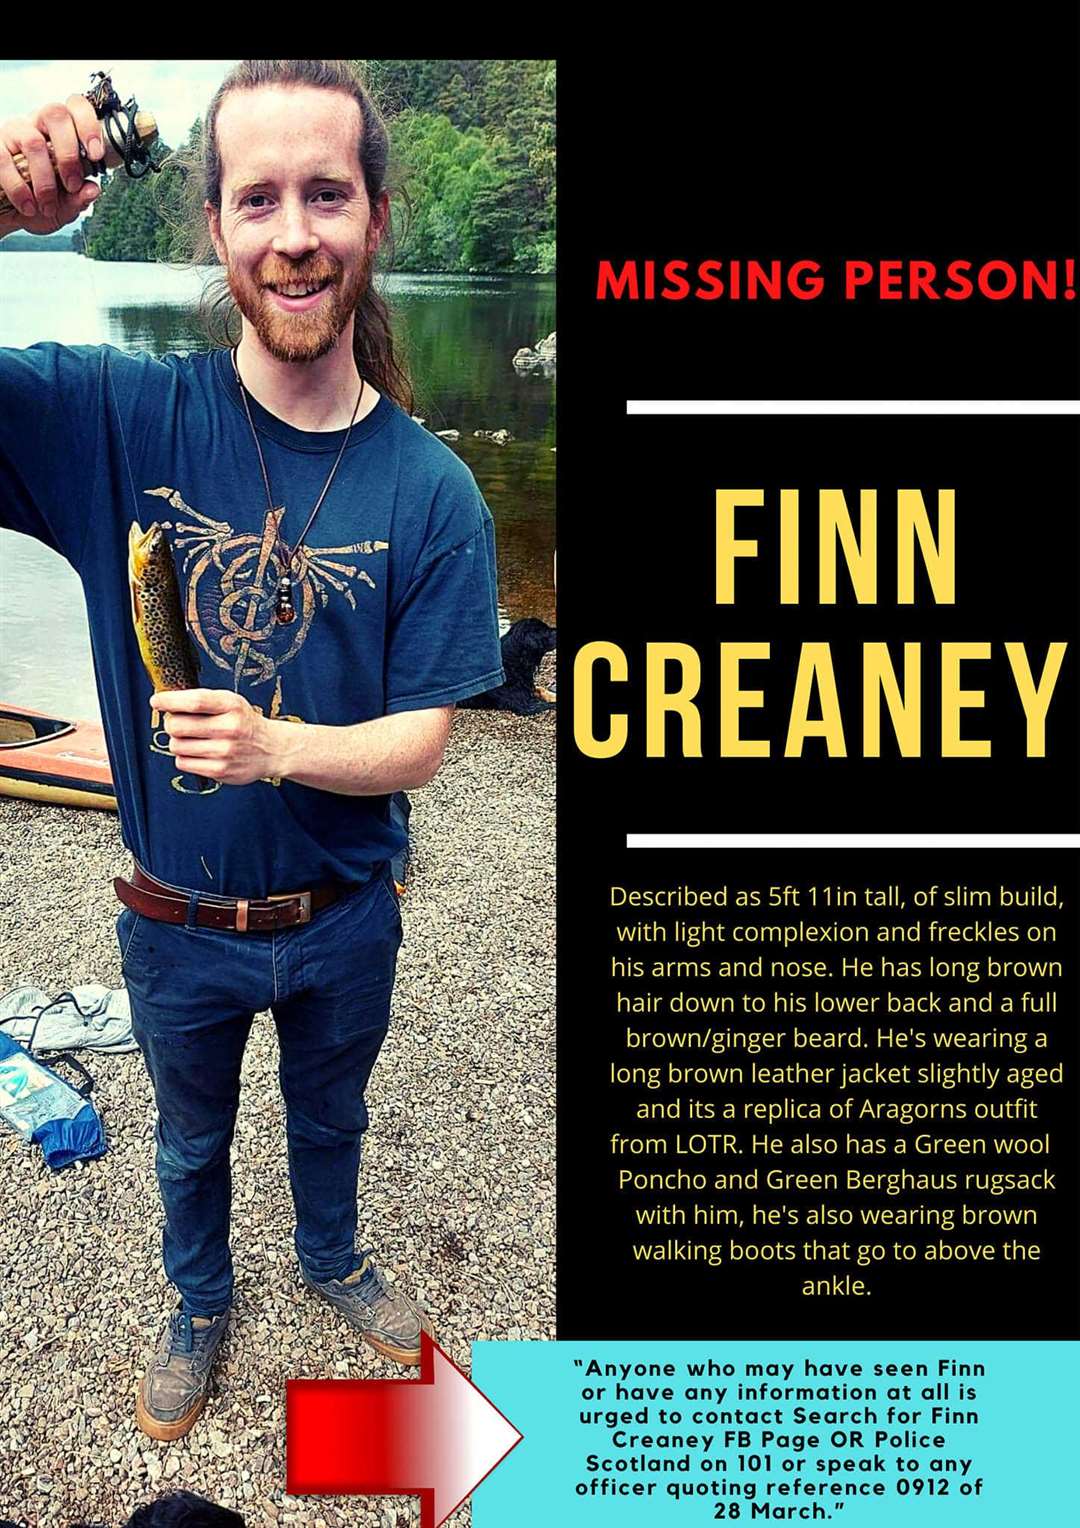 A fresh appeal to share the message about Finn Creaney far and wide has been made.